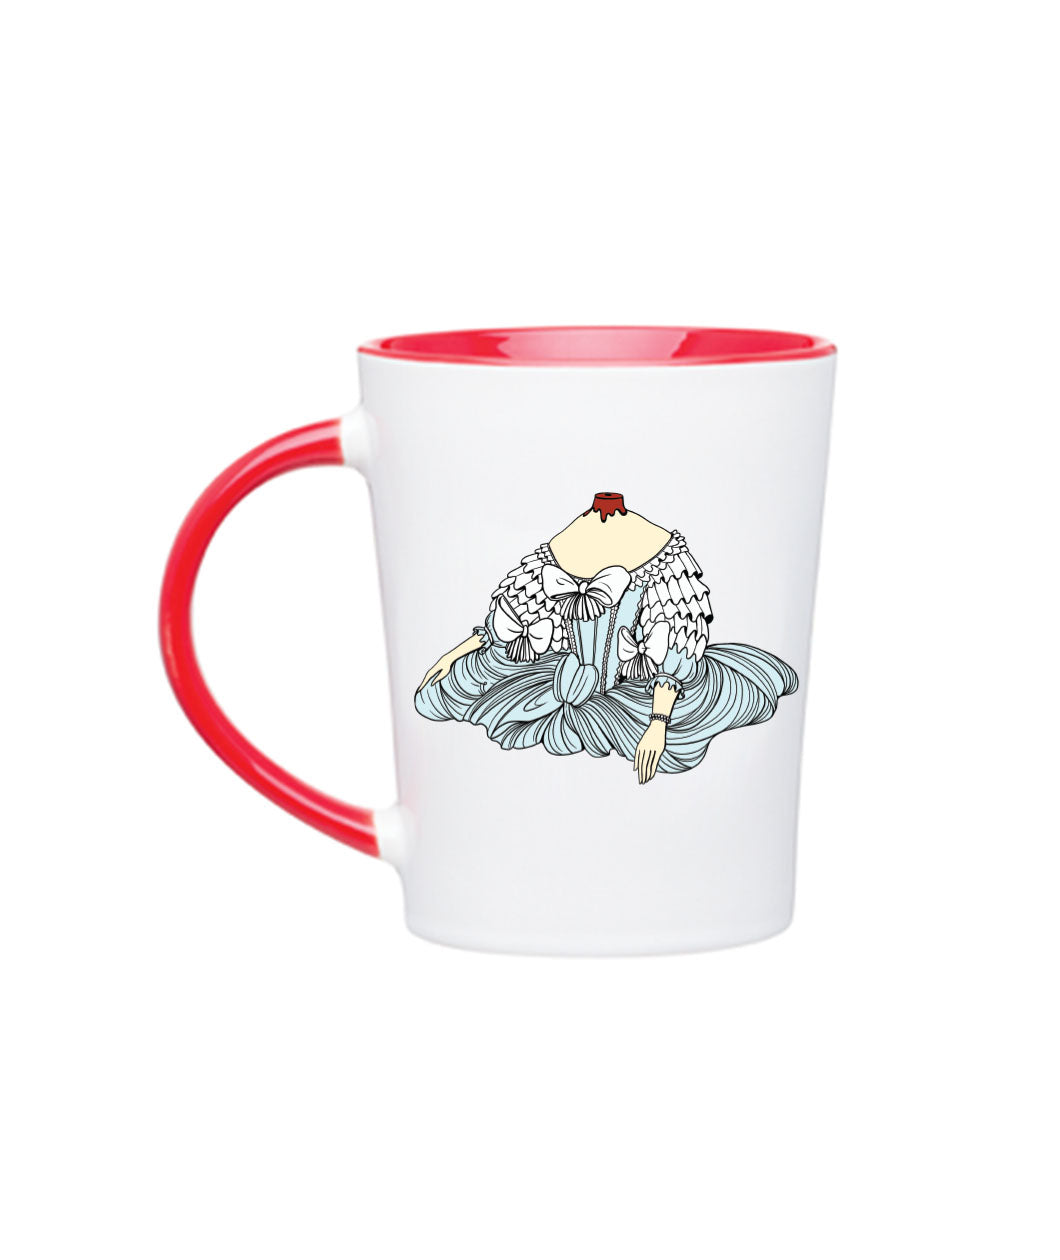 A Noble Blood white mug with red interior and handle. On the front of the mug is Marie Antoinette's bodice in a white and blue, ruffly corset with a cut off head with blood.  